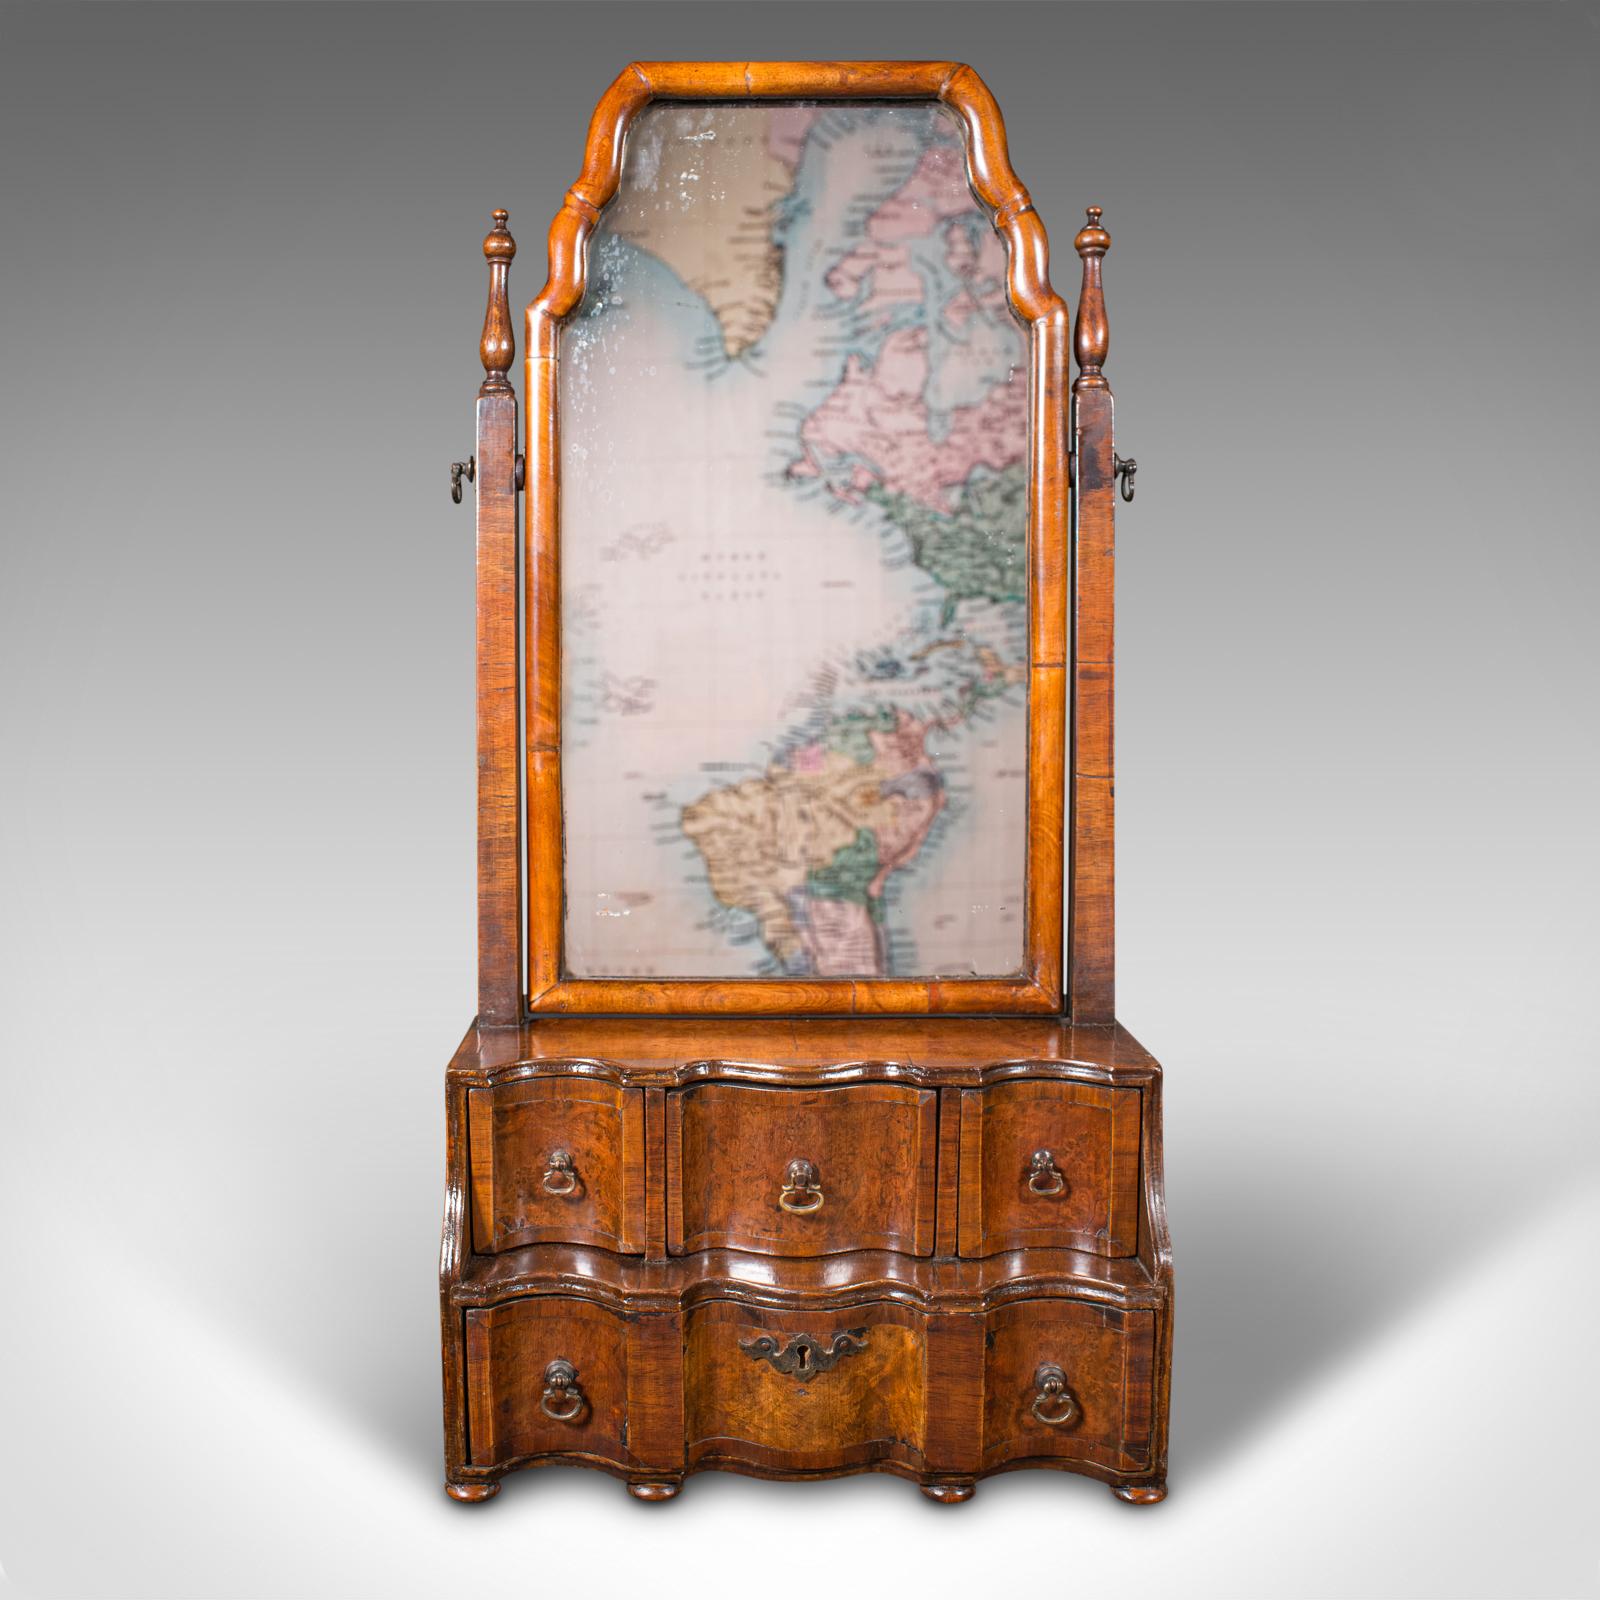 This is an antique bureau mirror. An English, walnut and glass mirror in Queen Anne taste, dating to the Victorian period, circa 1880.

Delightfully presented with fascinating overtones
Displays a desirable aged patina throughout
Select walnut